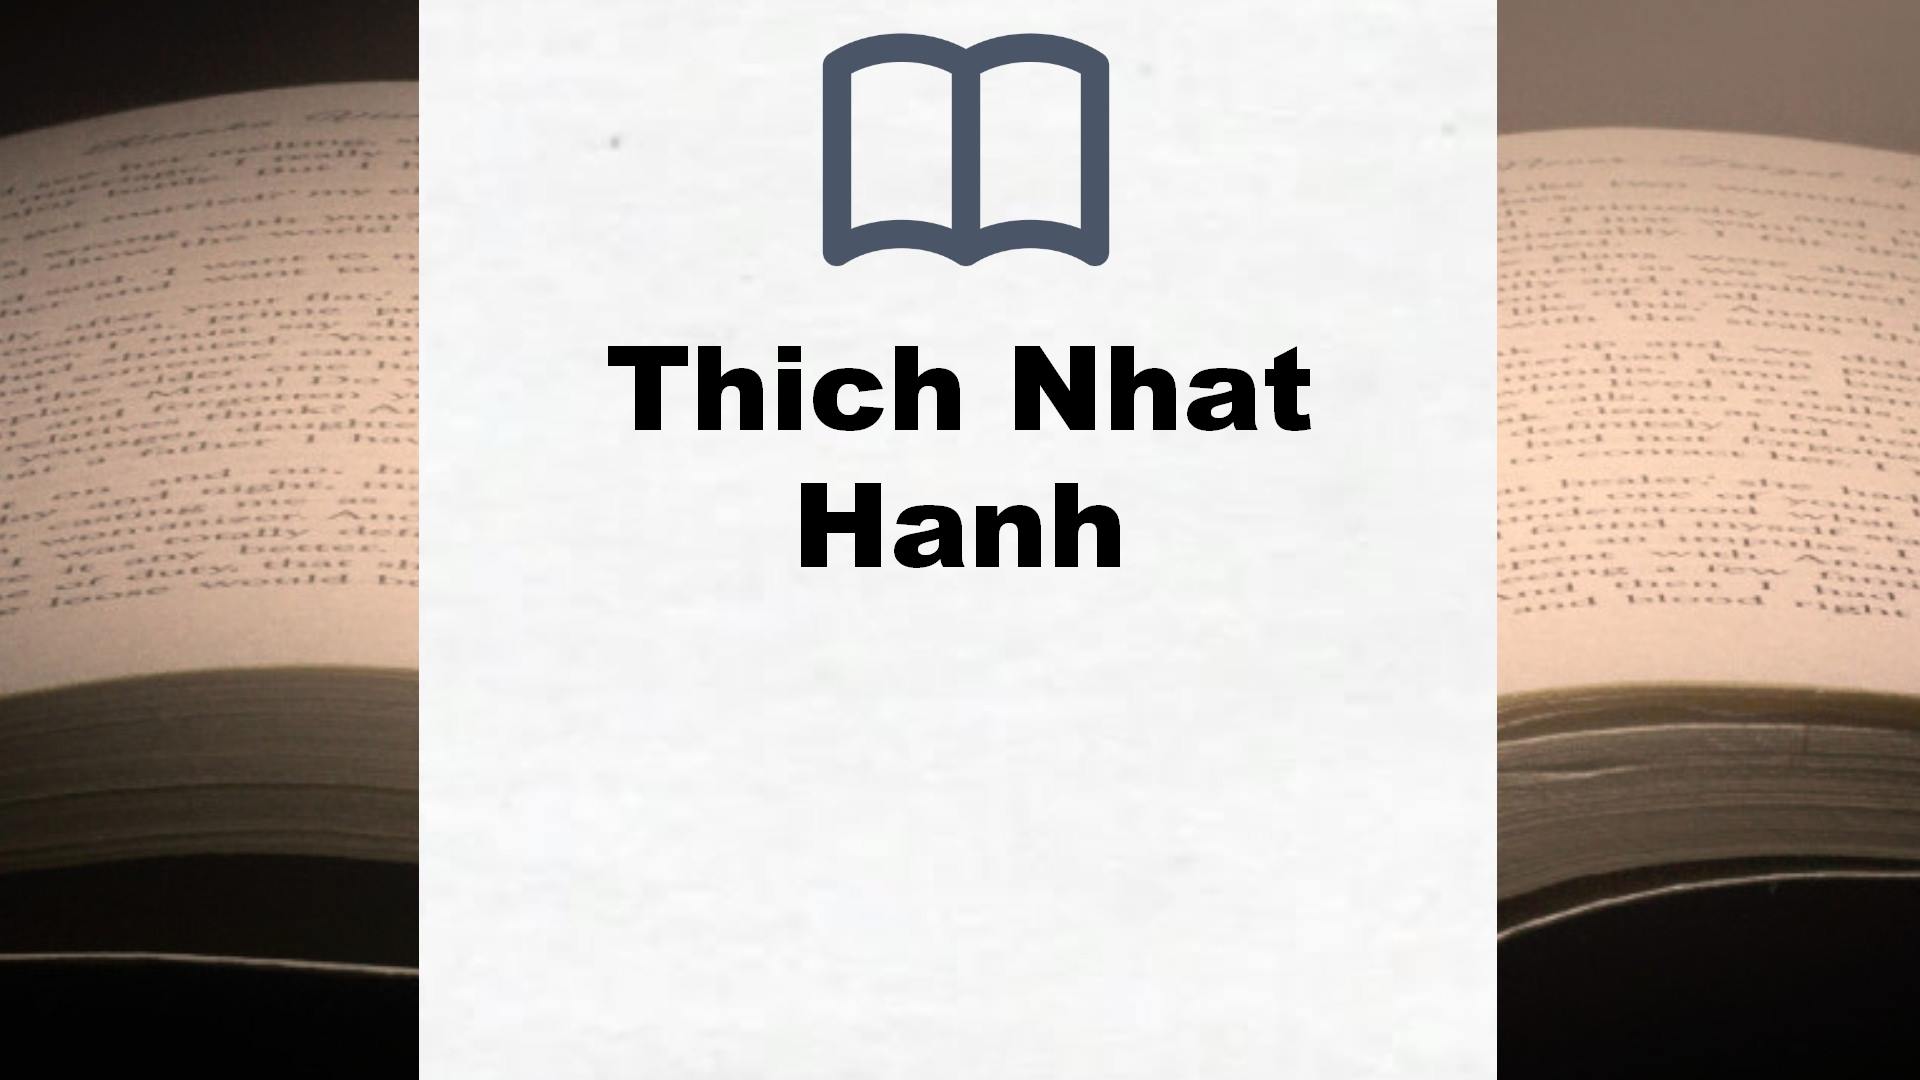 Libros Thich Nhat Hanh